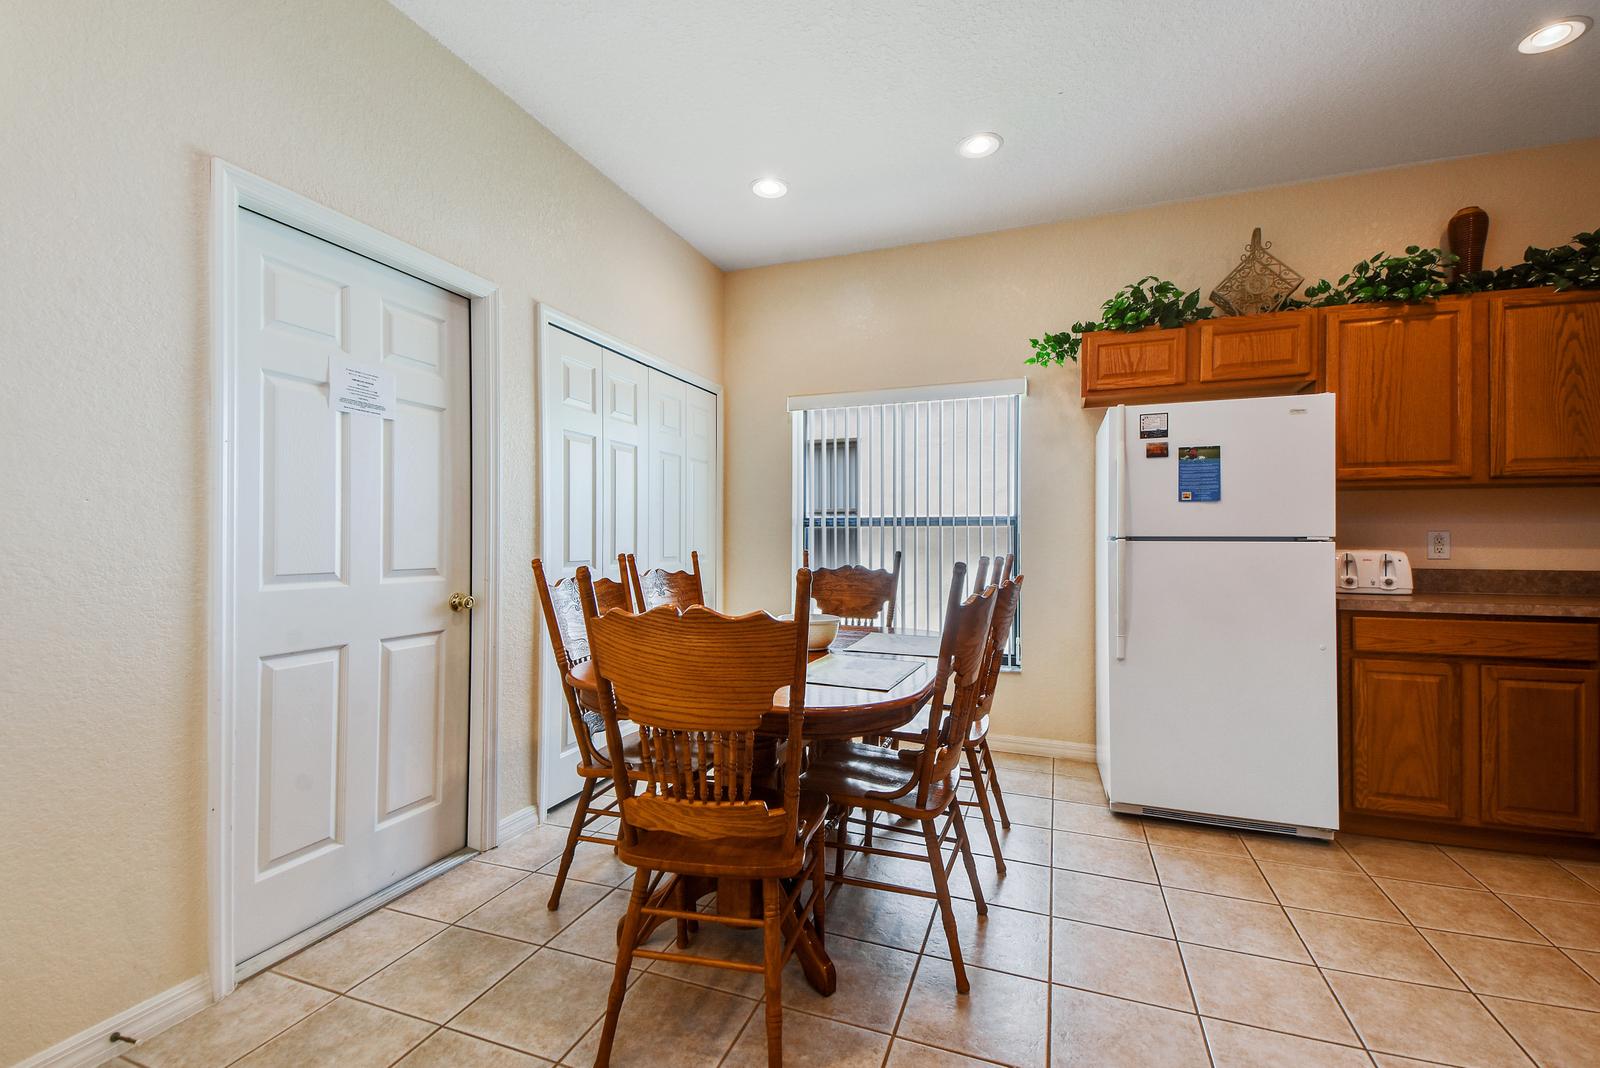 clermont vacation rentals vacation rentals united states florida clermont